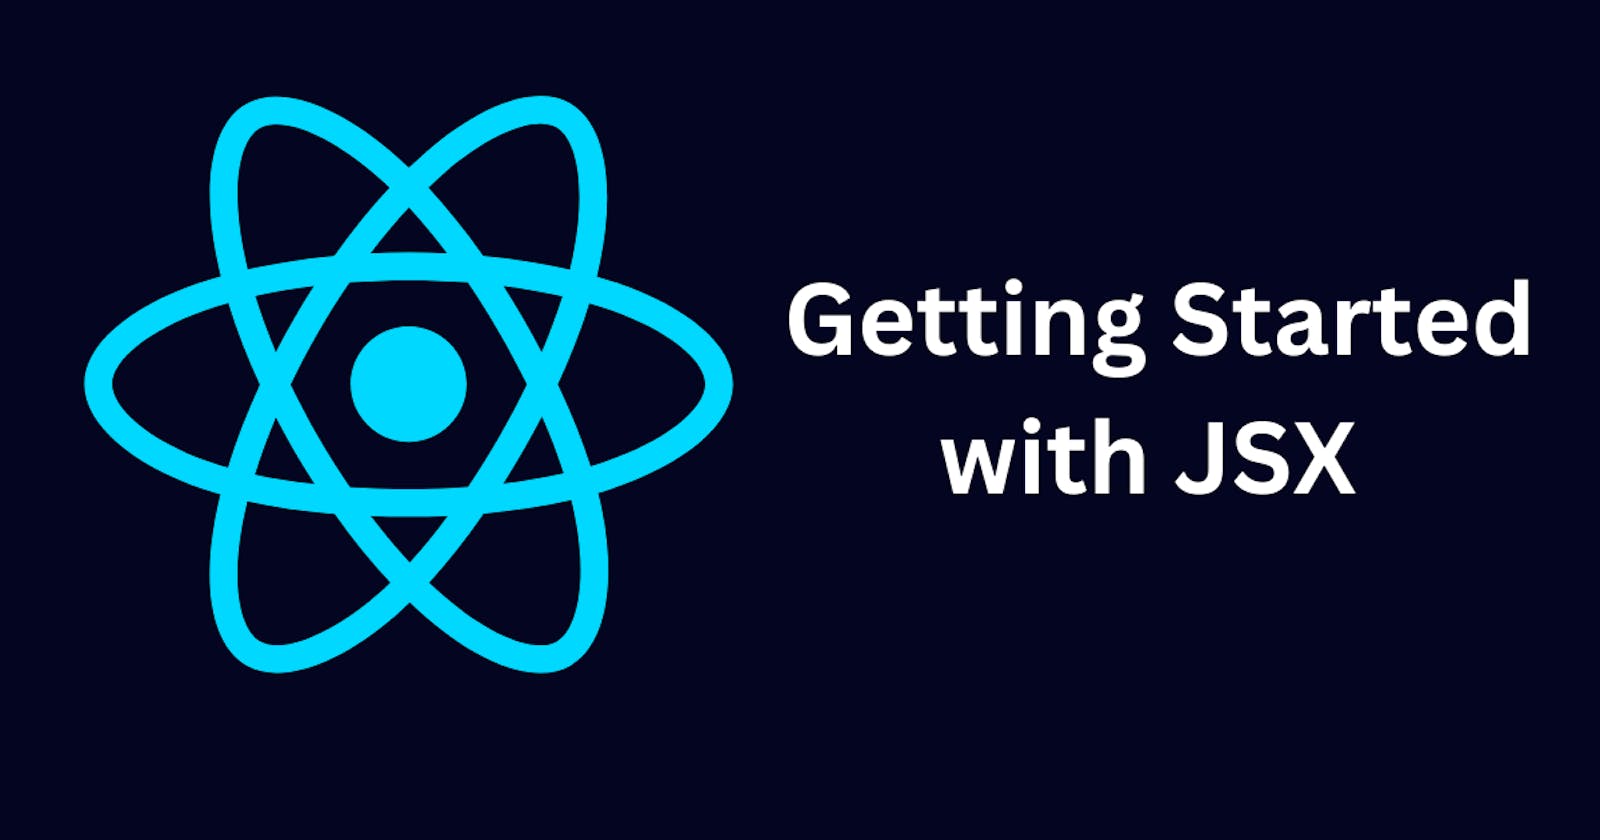 Getting Started with JSX